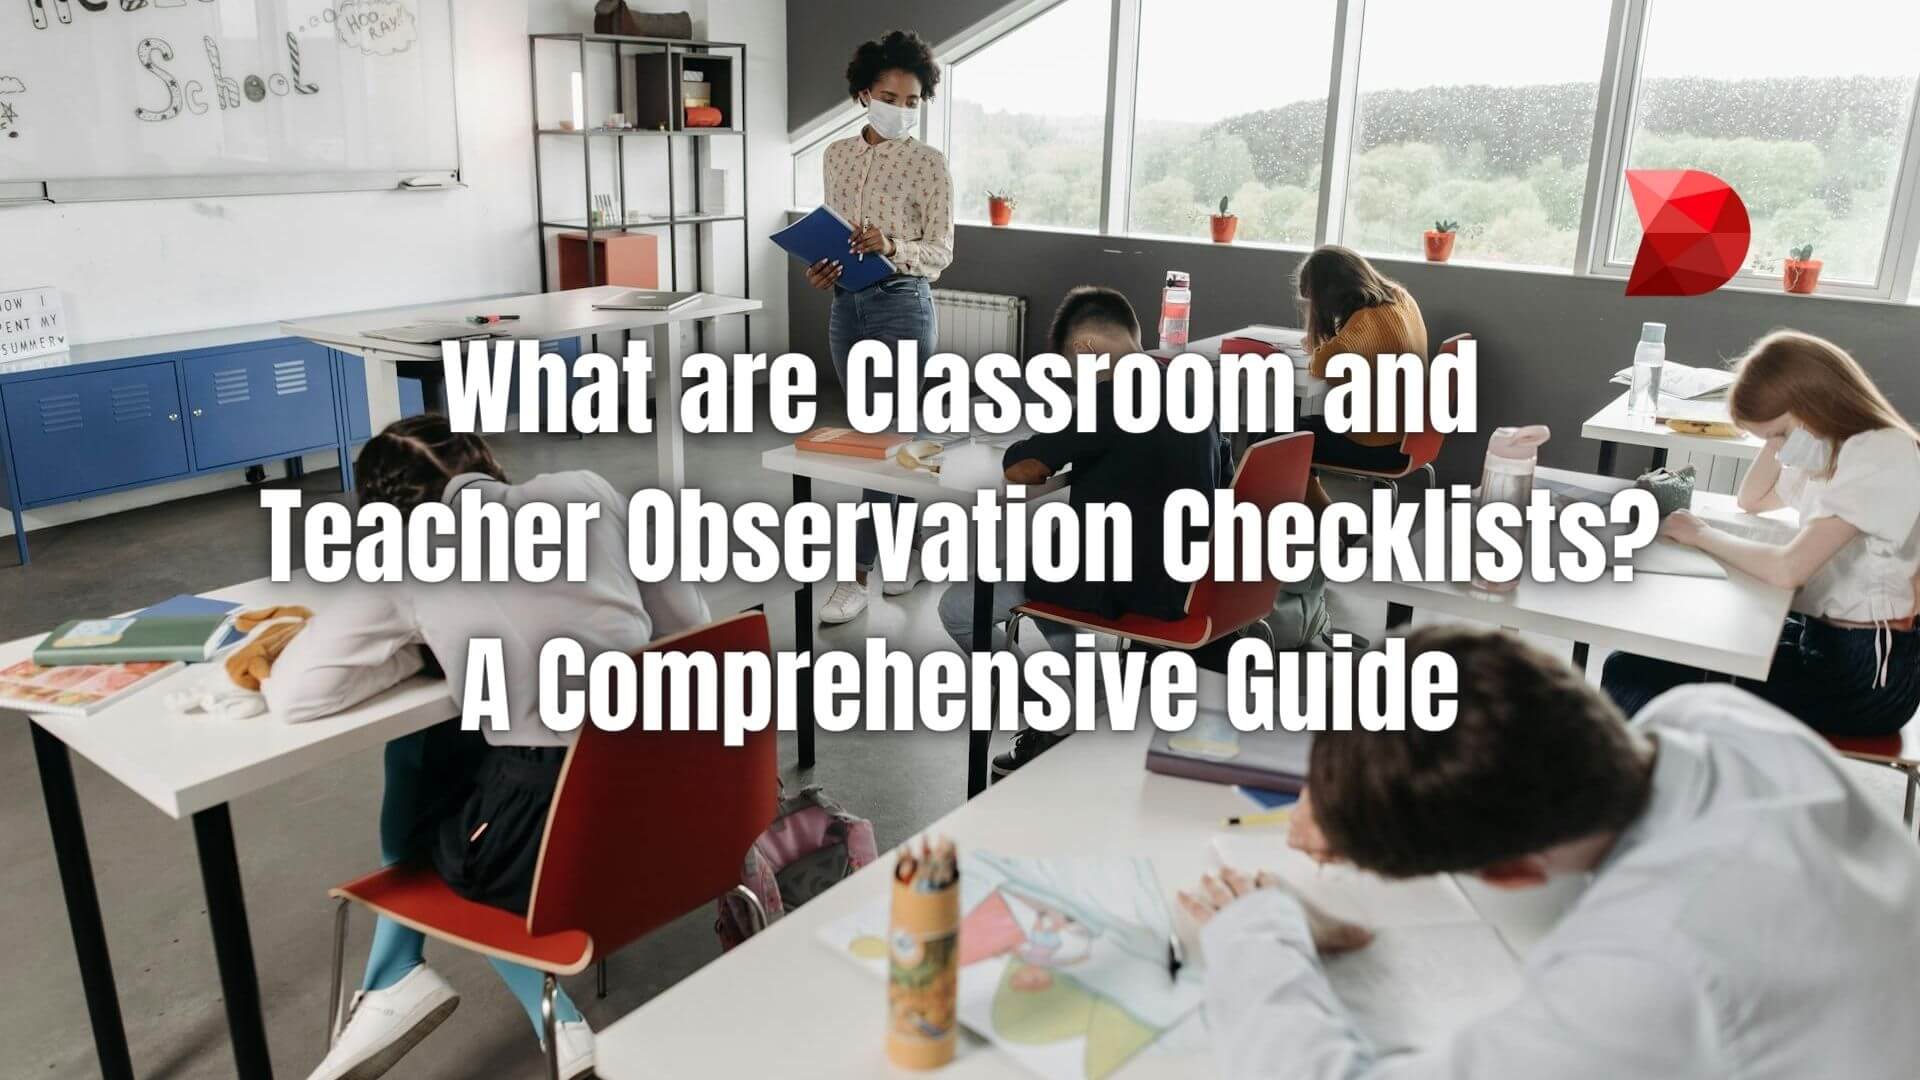 Streamline evaluations and enhance teaching effectiveness. Discover the ultimate guide to classroom and teacher observation checklists.